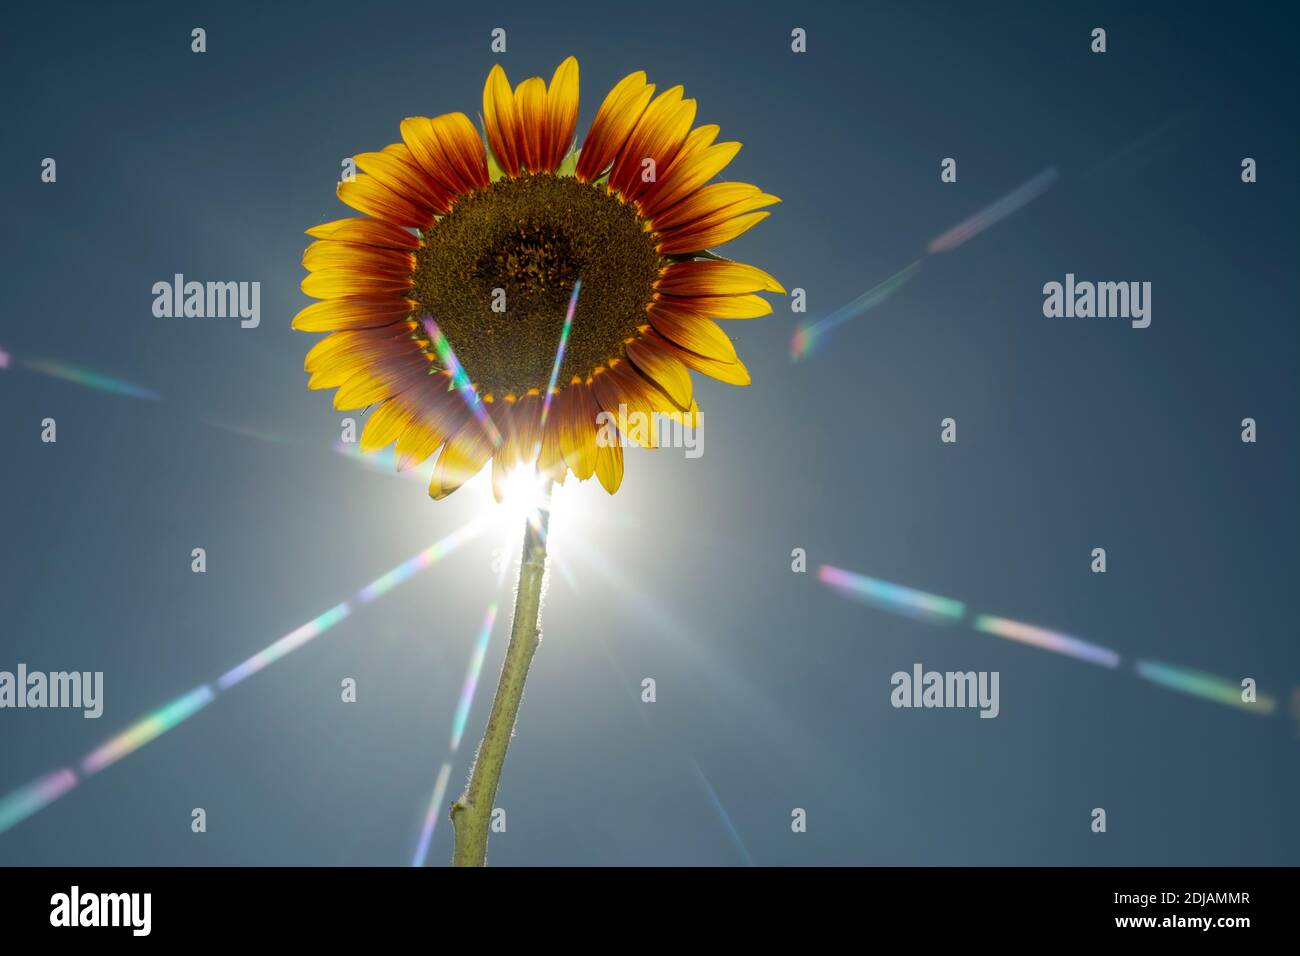 Colose-up sun flower against blue sky on sunny day. Stock Photo